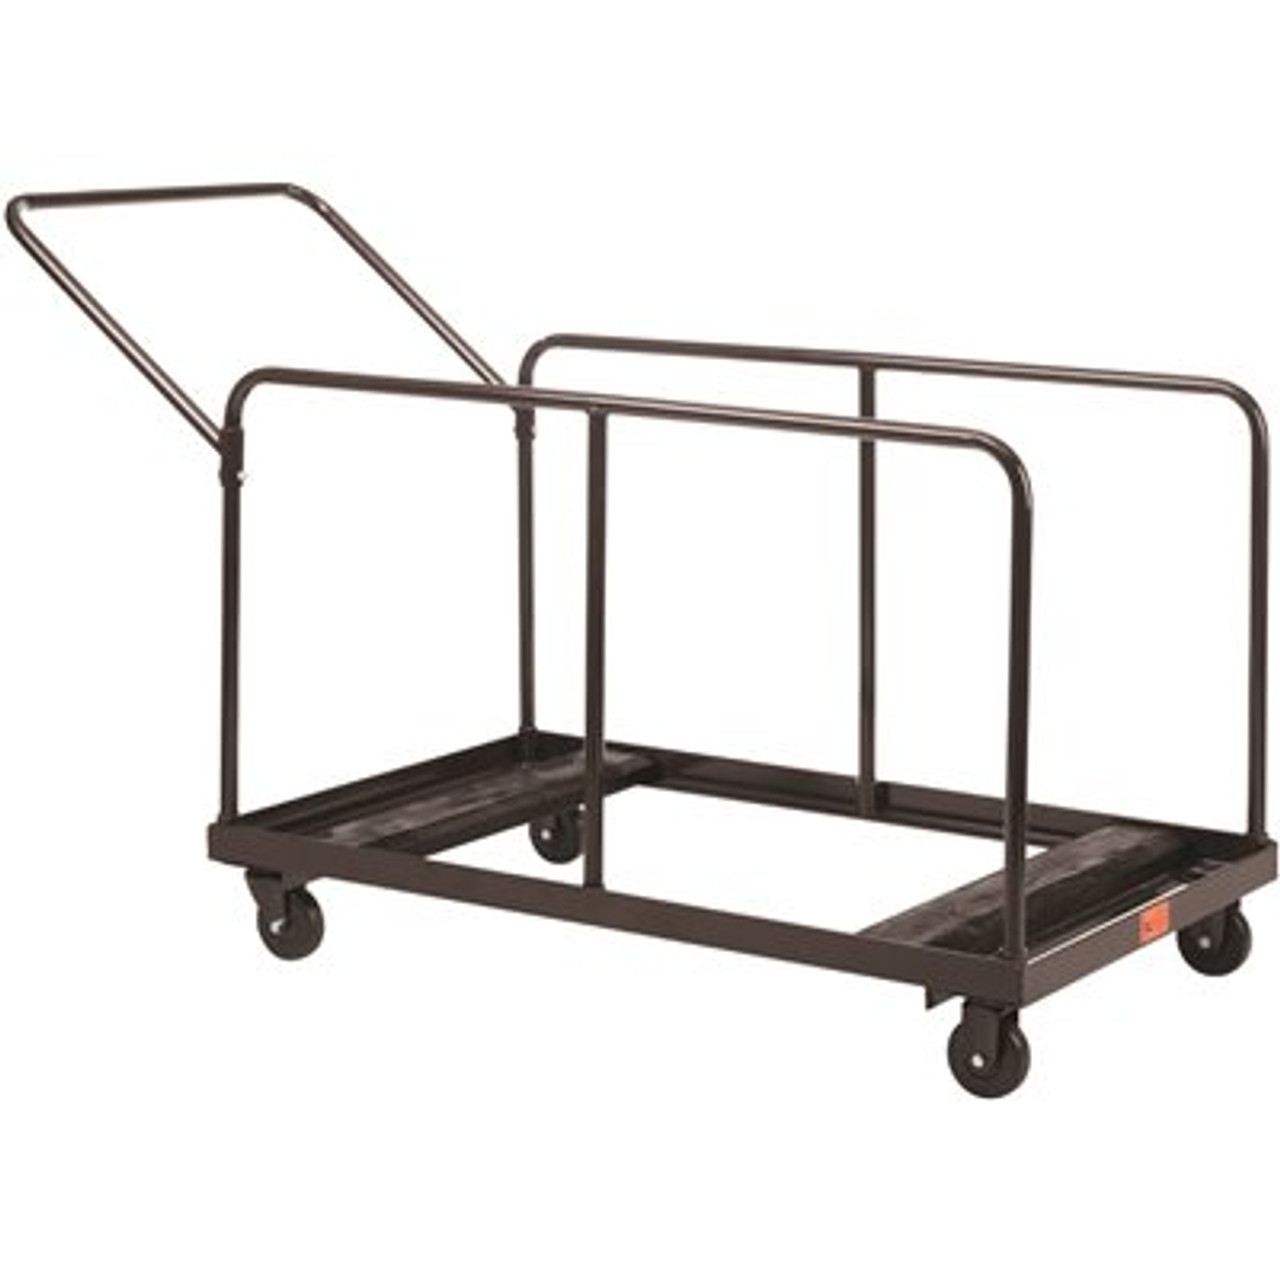 National Public Seating 660 lbs. Weight Capacity Folding Table Dolly with Vertical Storage Round and Rectangular Tables